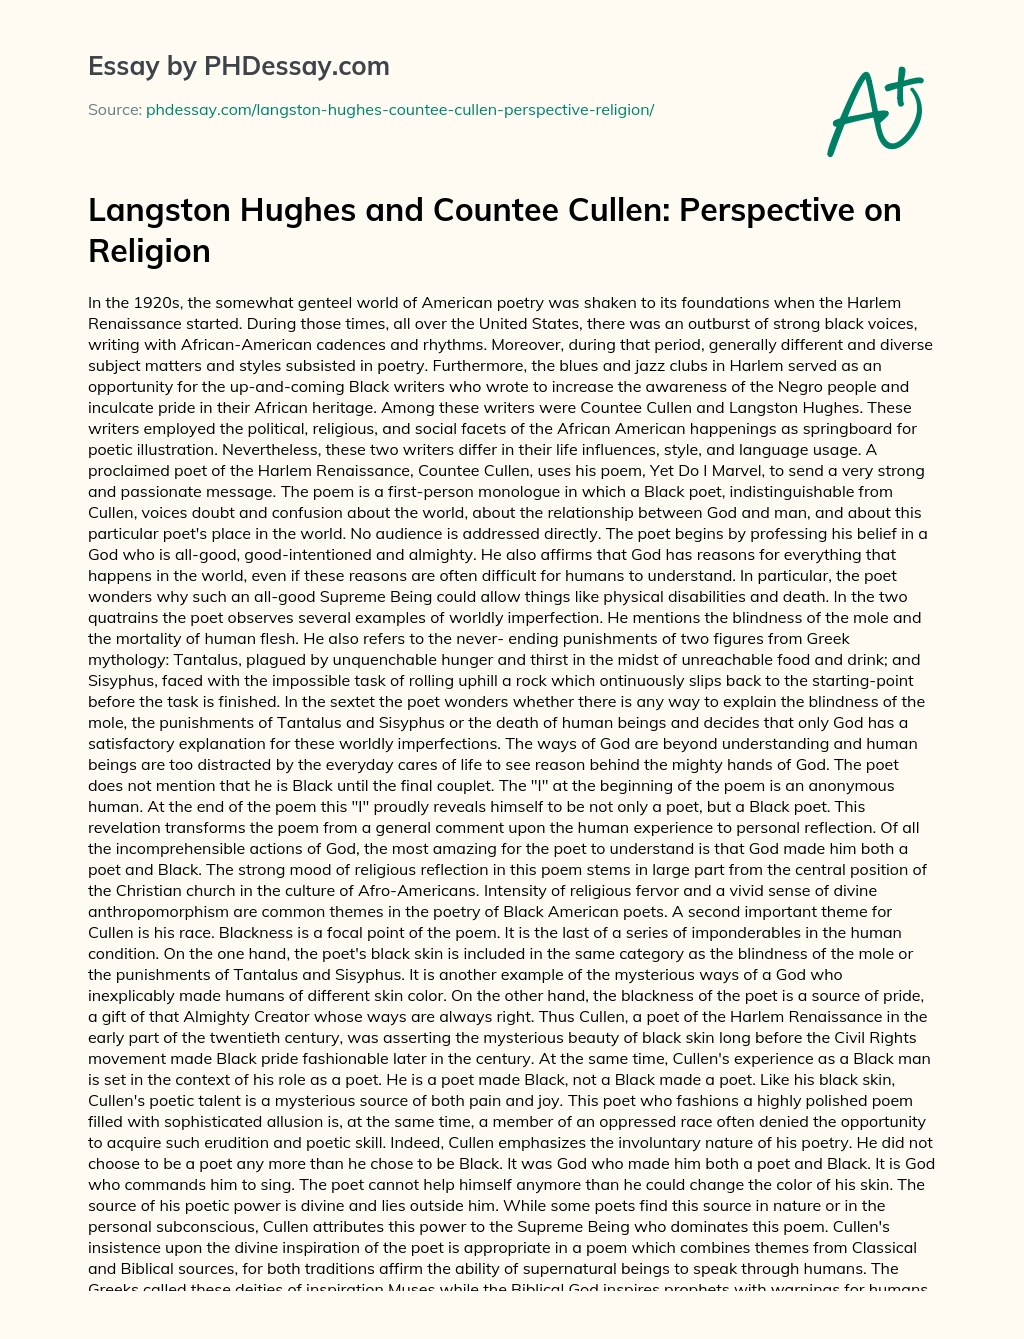 Langston Hughes and Countee Cullen: Perspective on Religion essay